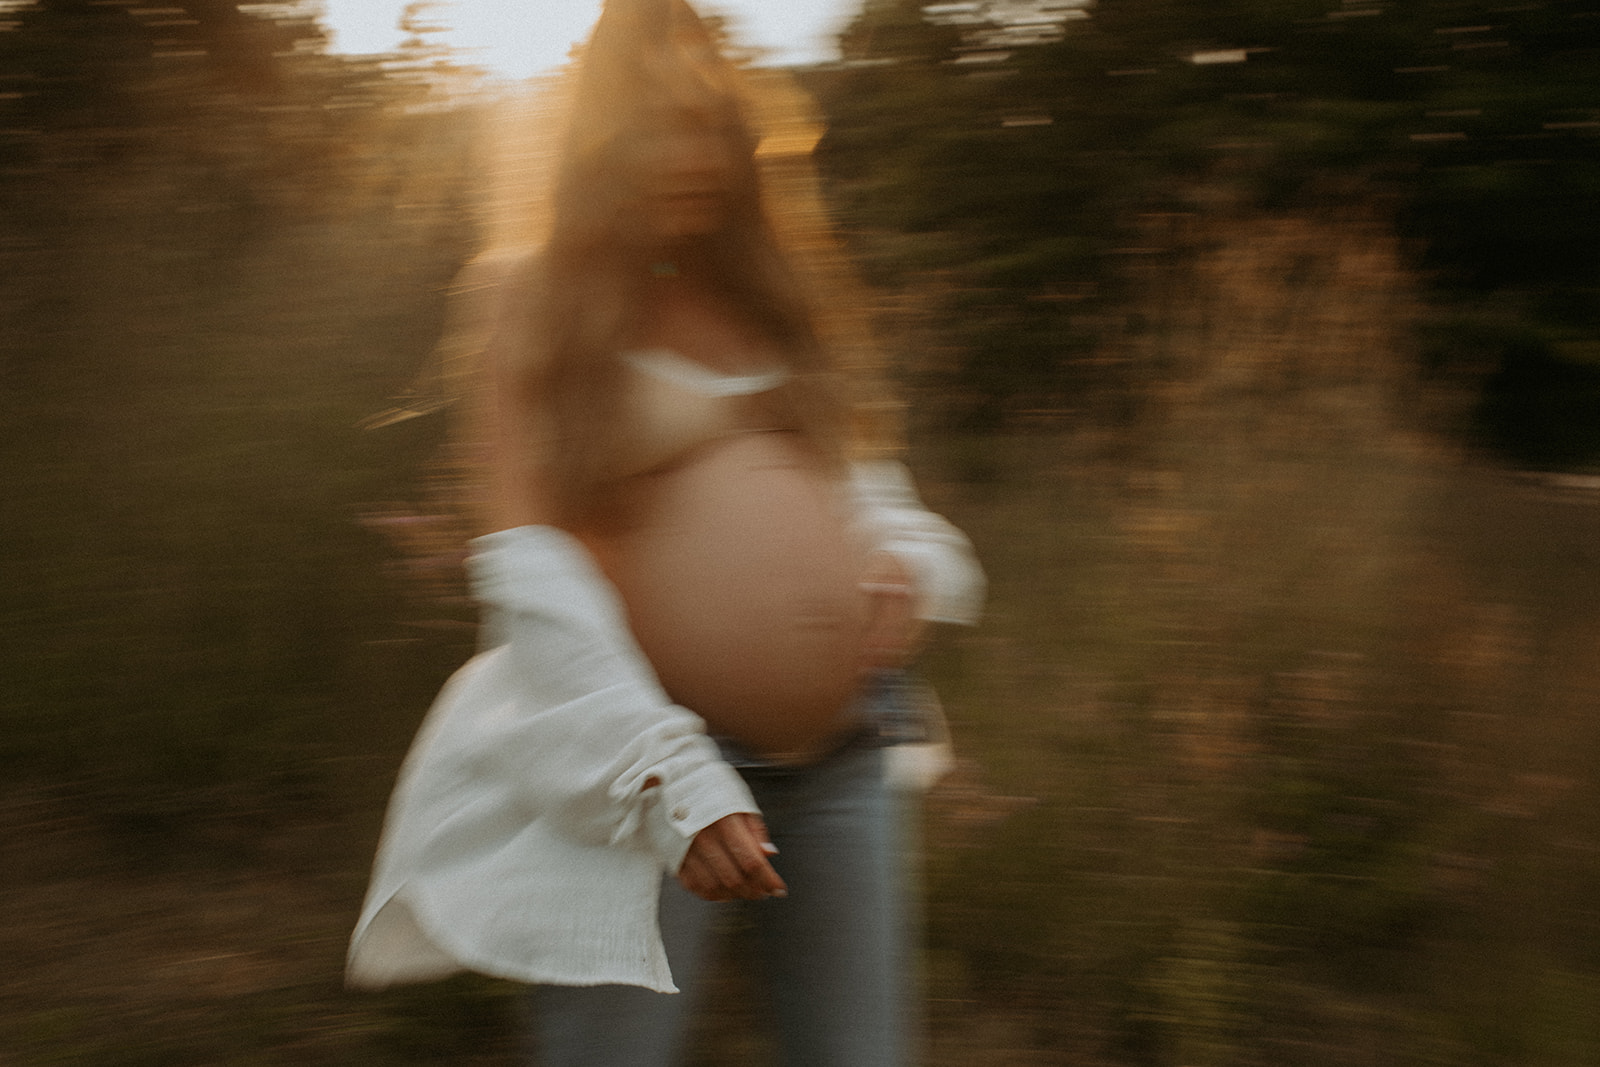 Artistic maternity portrait taken outdoors at sunset by a professional photographer